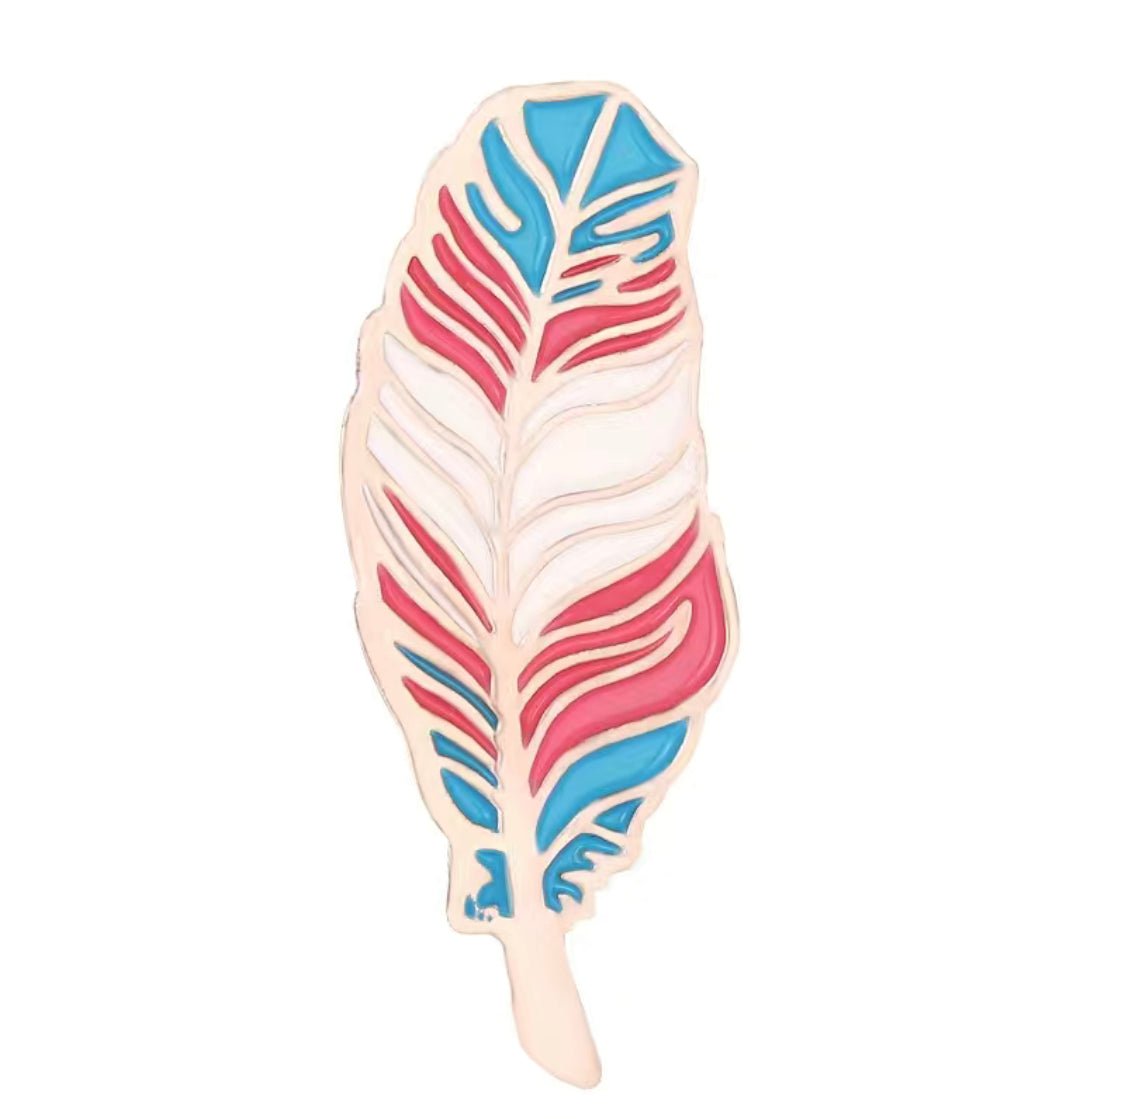 Transgender Flag Two Sprit Feather Enamel Lapel Brooch Pin for Aestheticians - Beauty Pro Supplies Canada